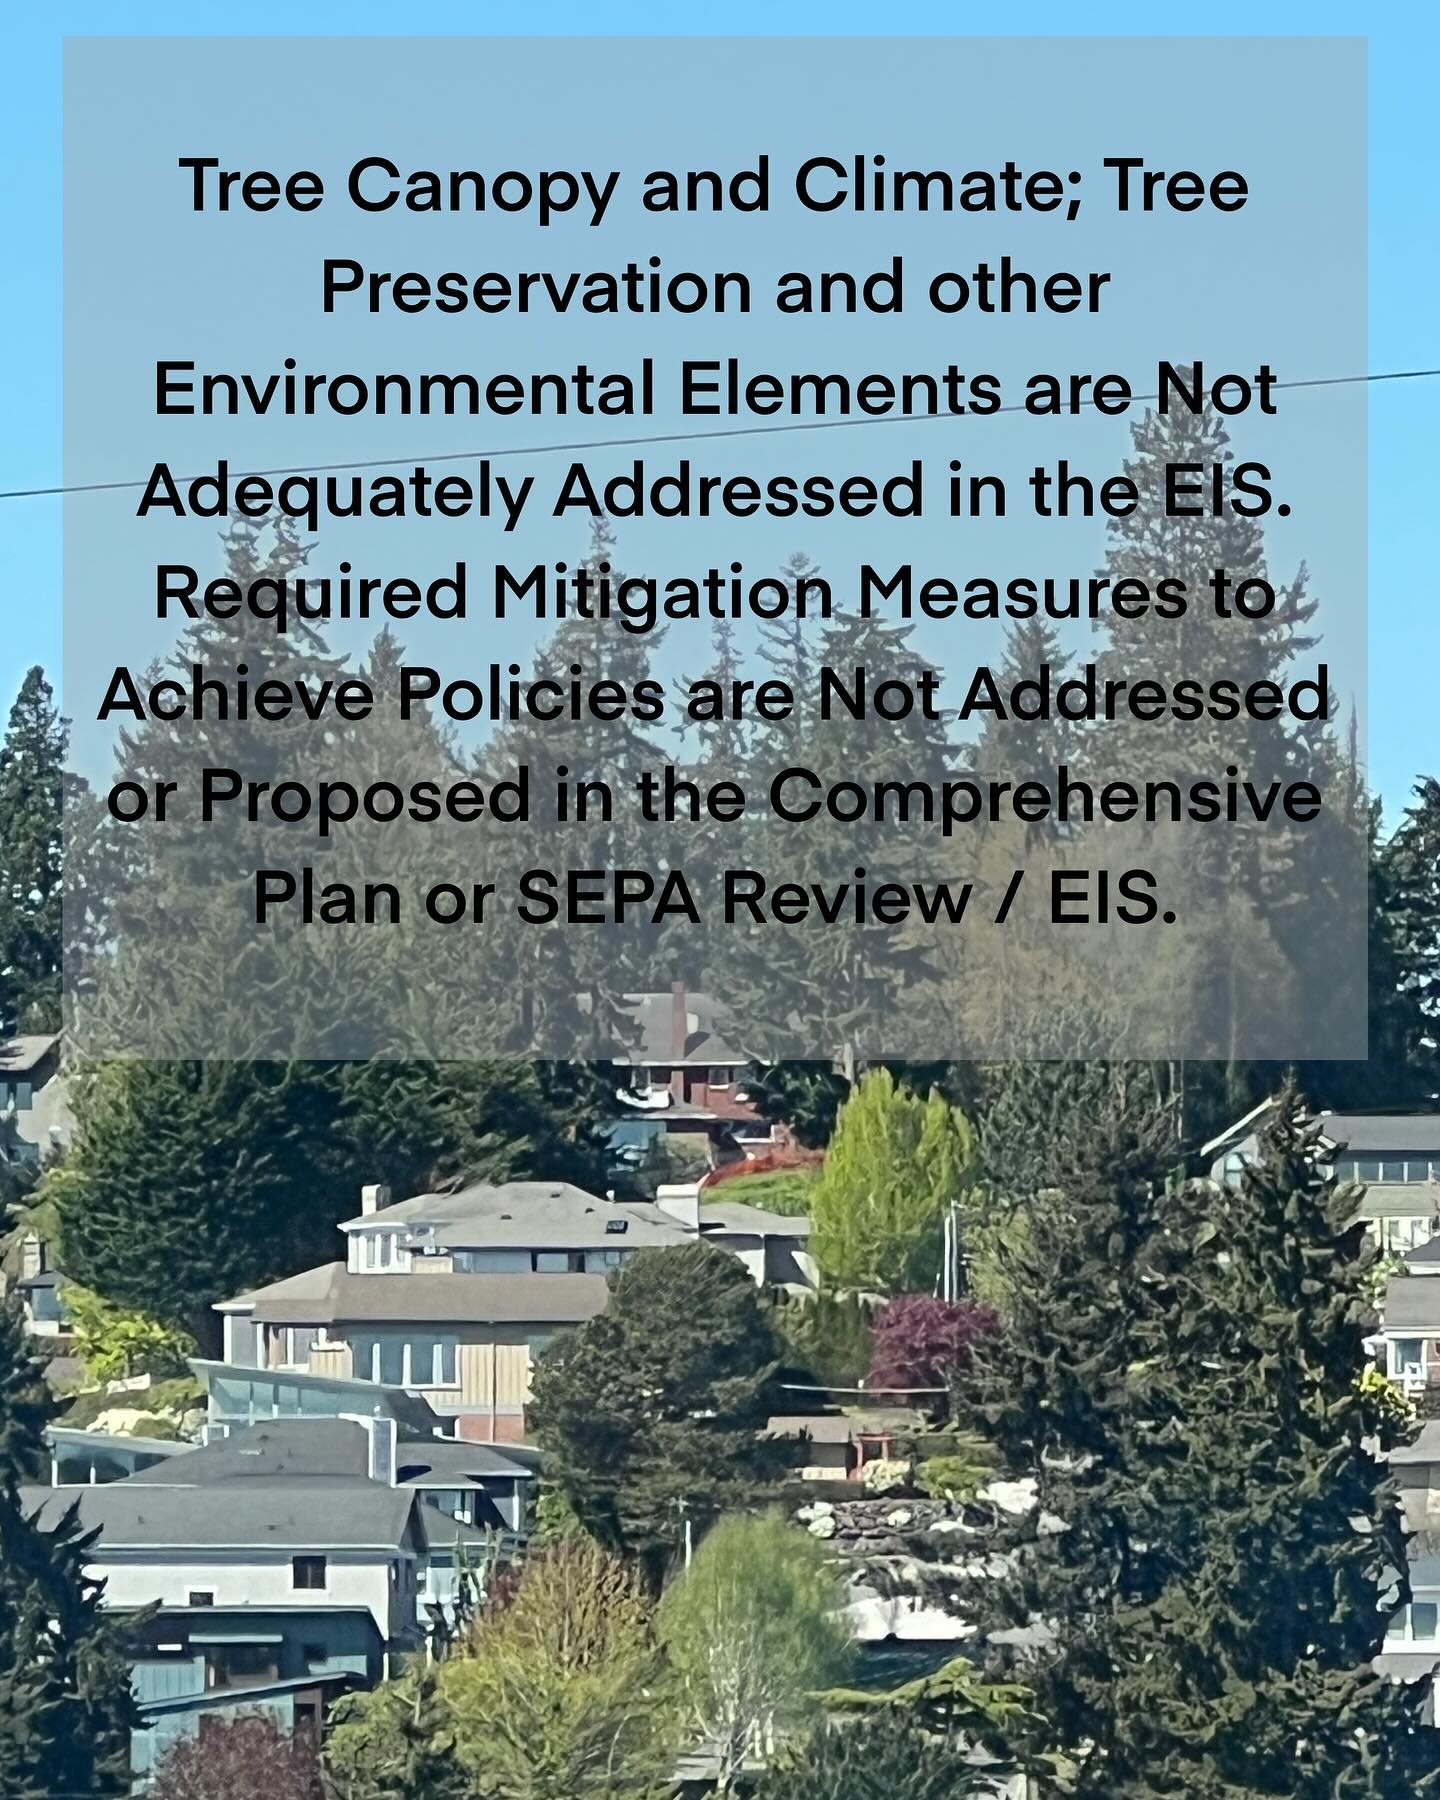 COMMENTS DUE TODAY Representative Gerry Pollet, 46th District has shared these comments regarding the One Seattle Draft Comprehensive Plan and Draft EIS Tree Canopy and Climate; 

&ldquo;Tree Preservation and other Environmental Elements are Not Adeq